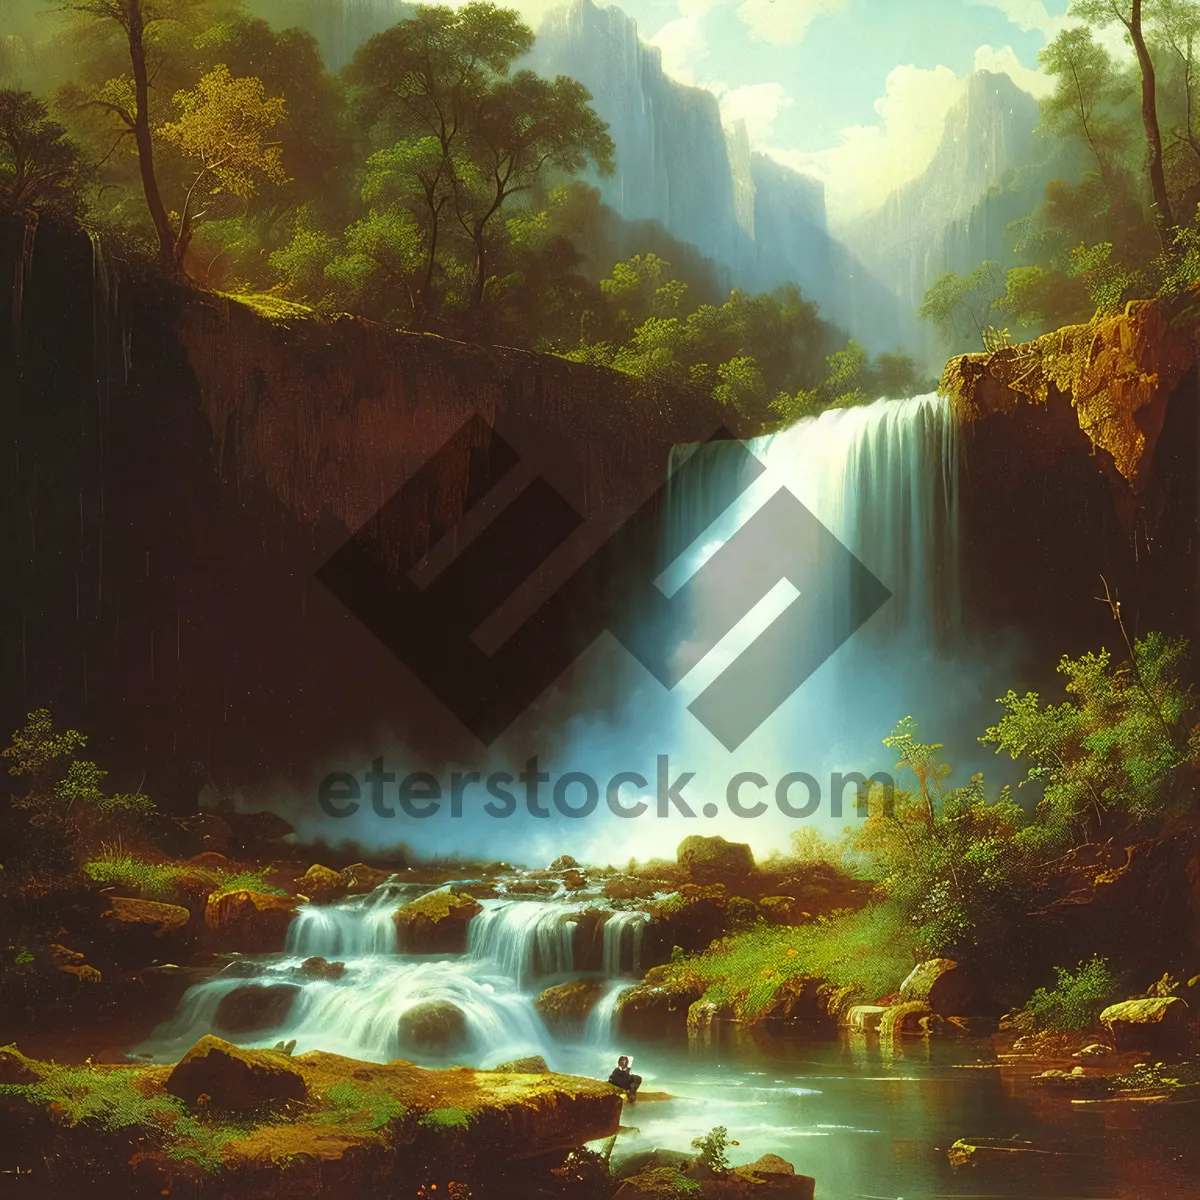 Picture of Serene Cascade in Mountainous Forest Park